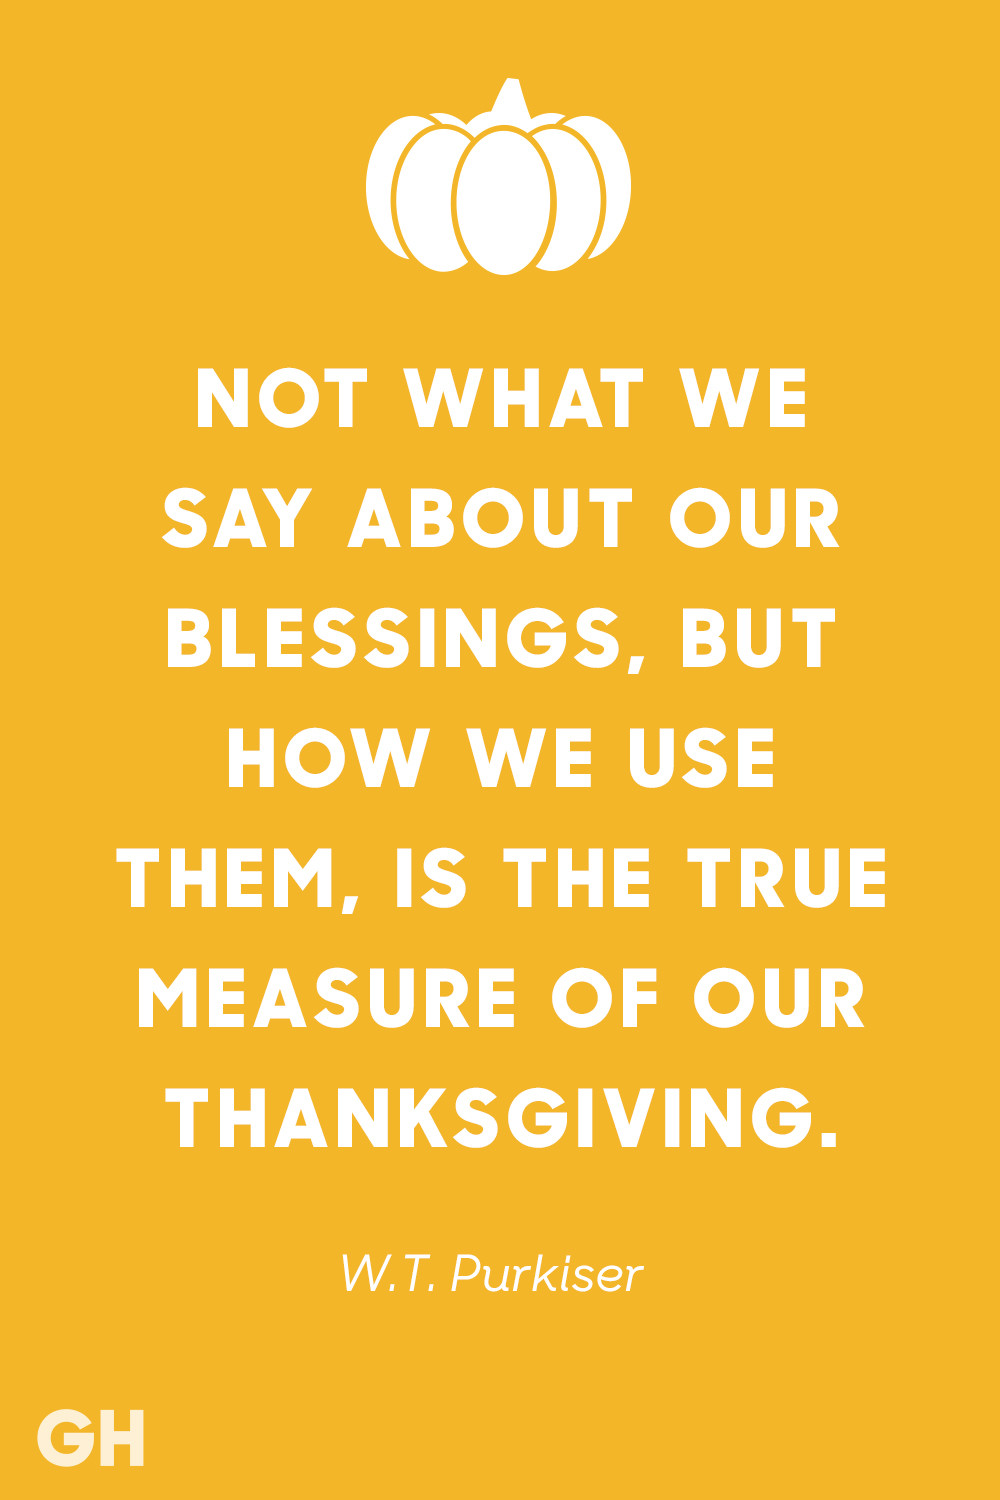 Thanksgiving Sayings Quotes
 15 Best Thanksgiving Quotes Inspirational and Funny